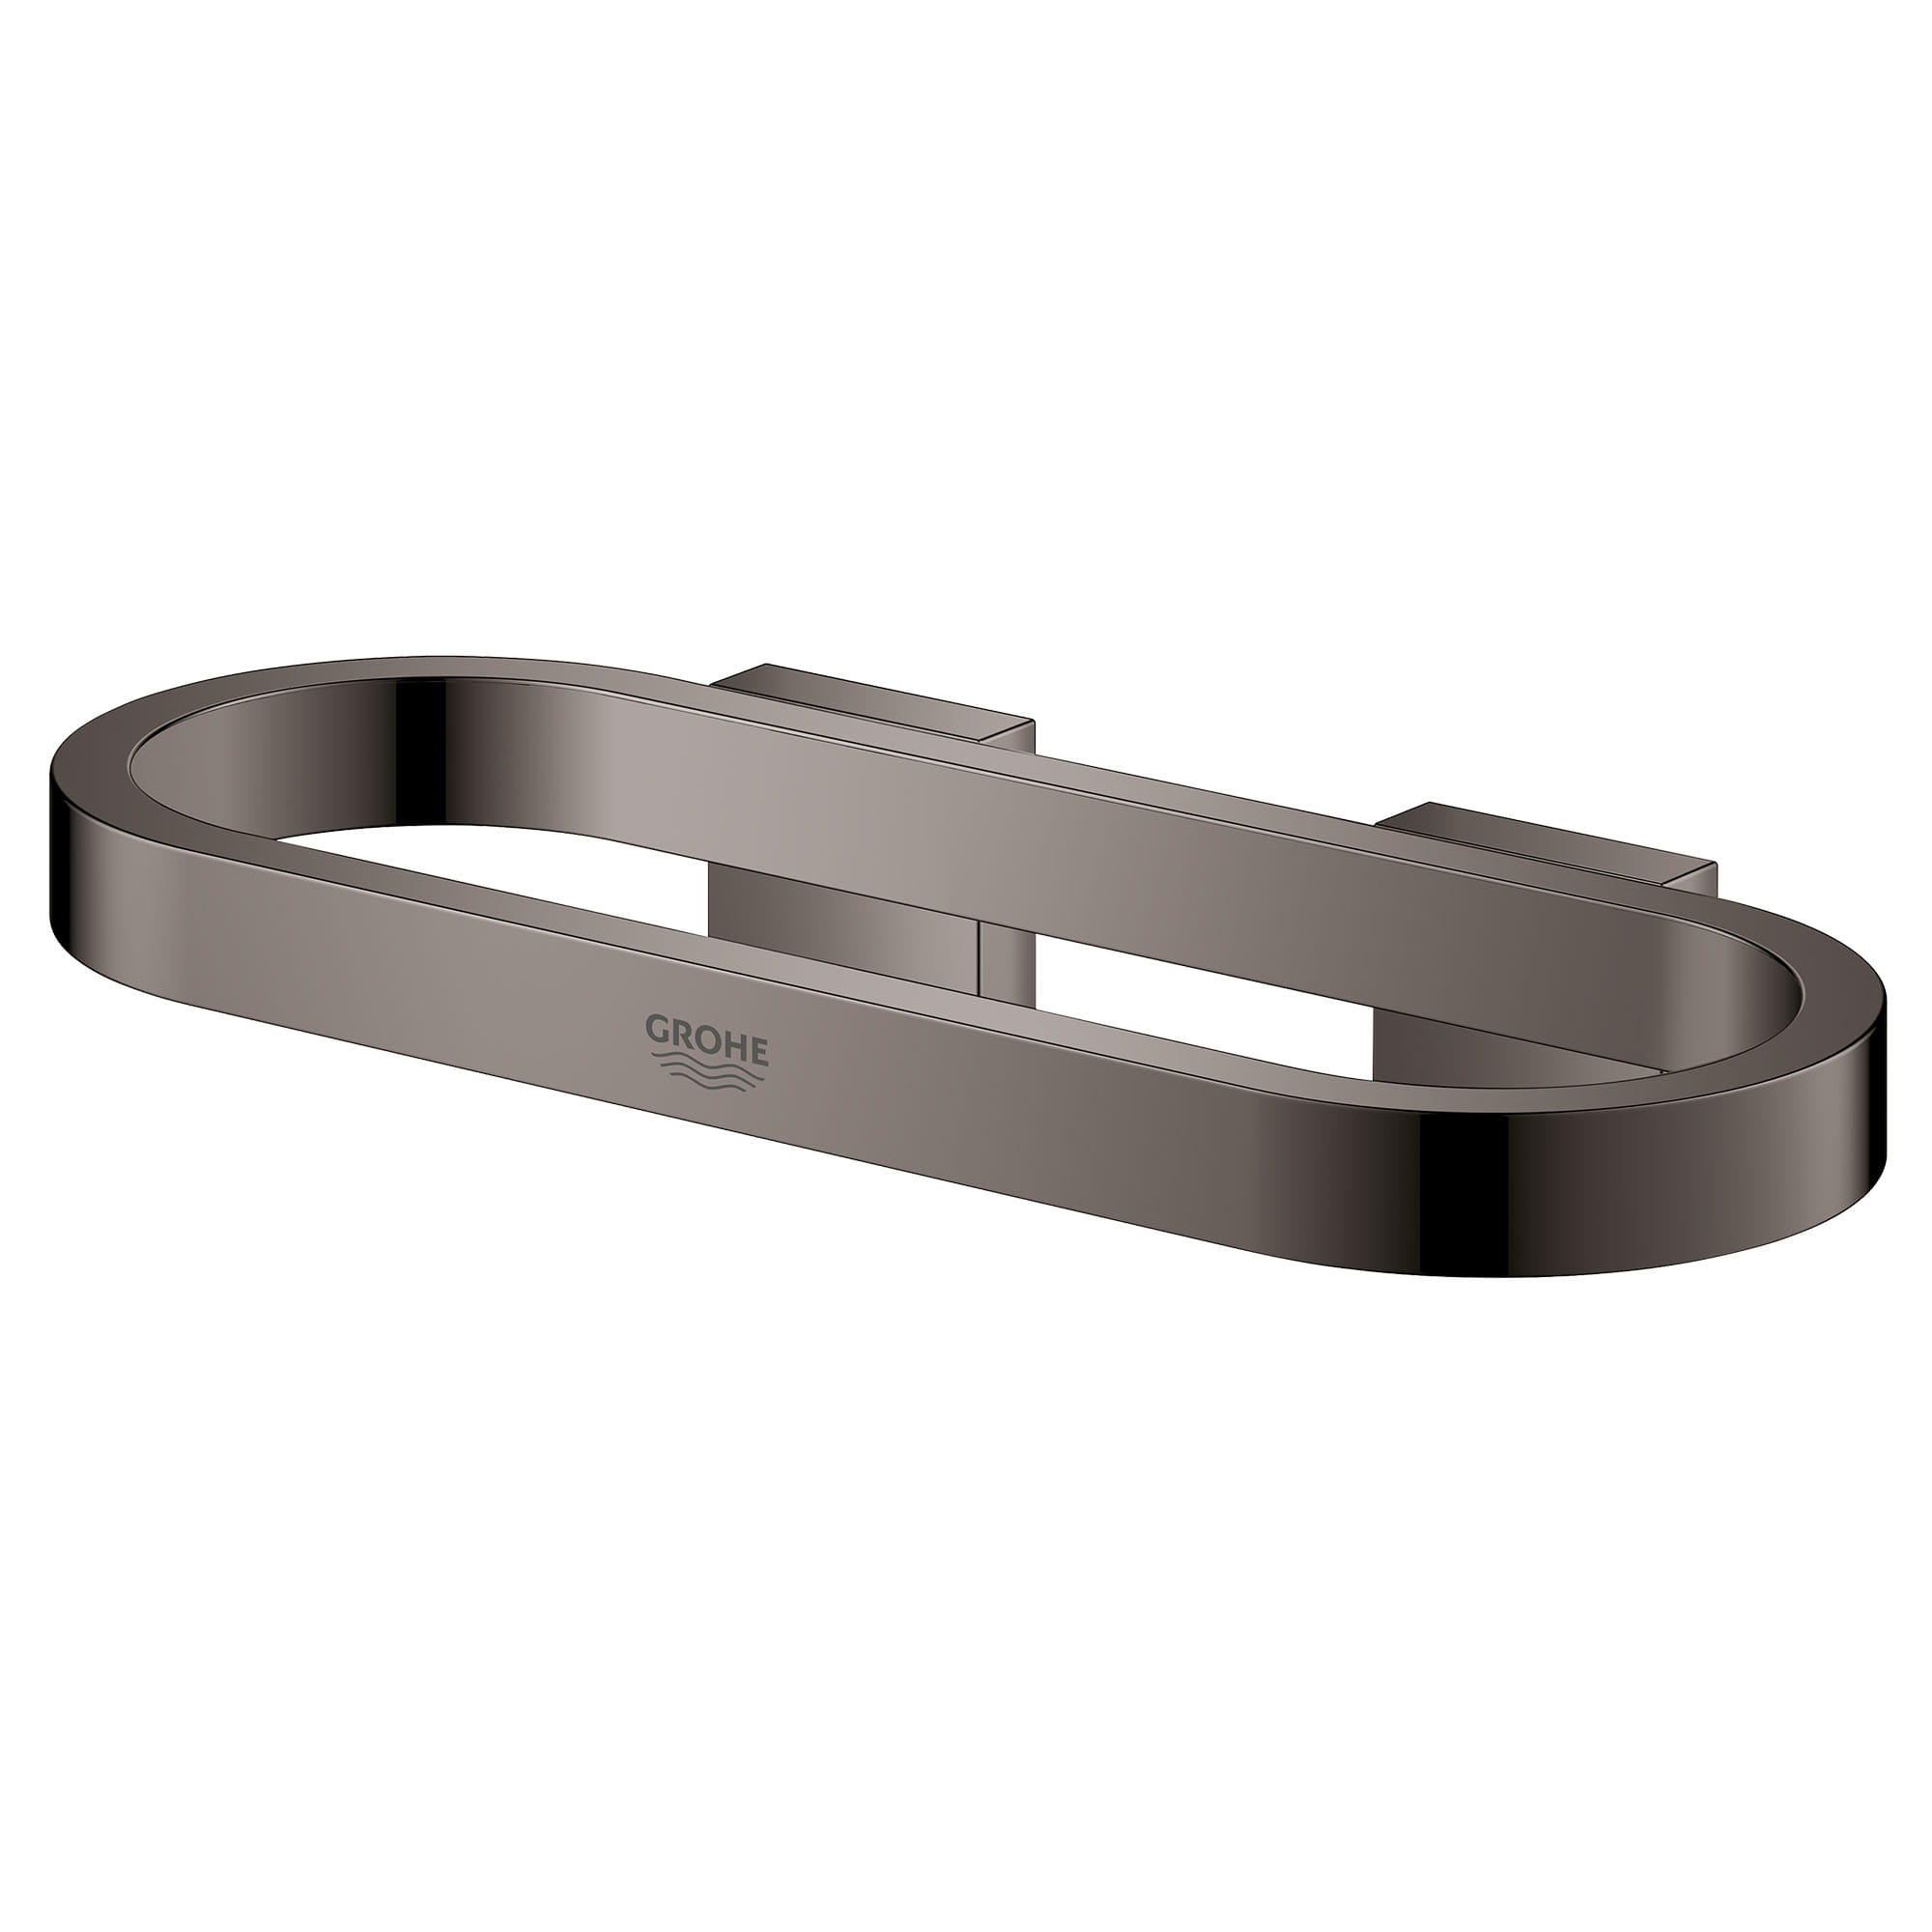 Towel Ring GROHE HARD GRAPHITE